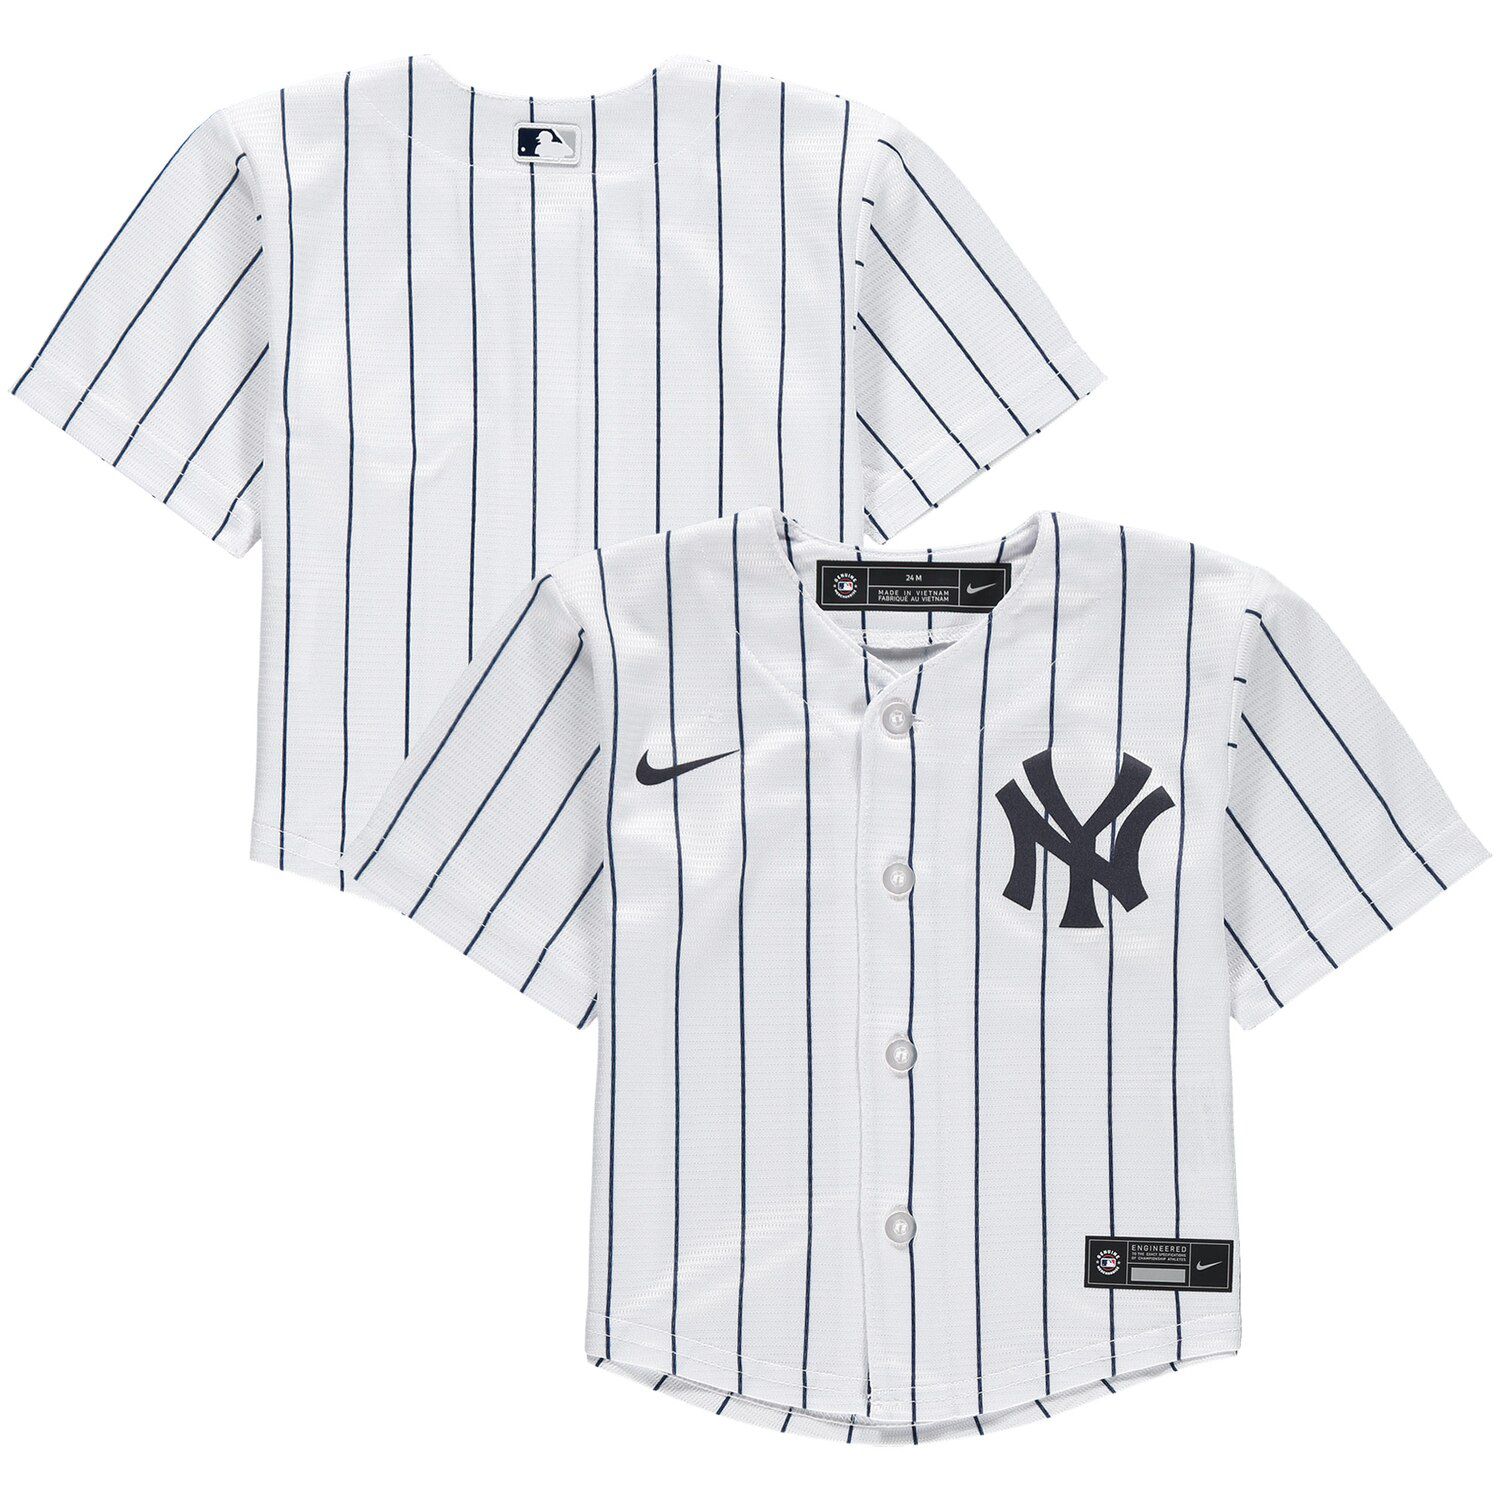 yankees name on jersey